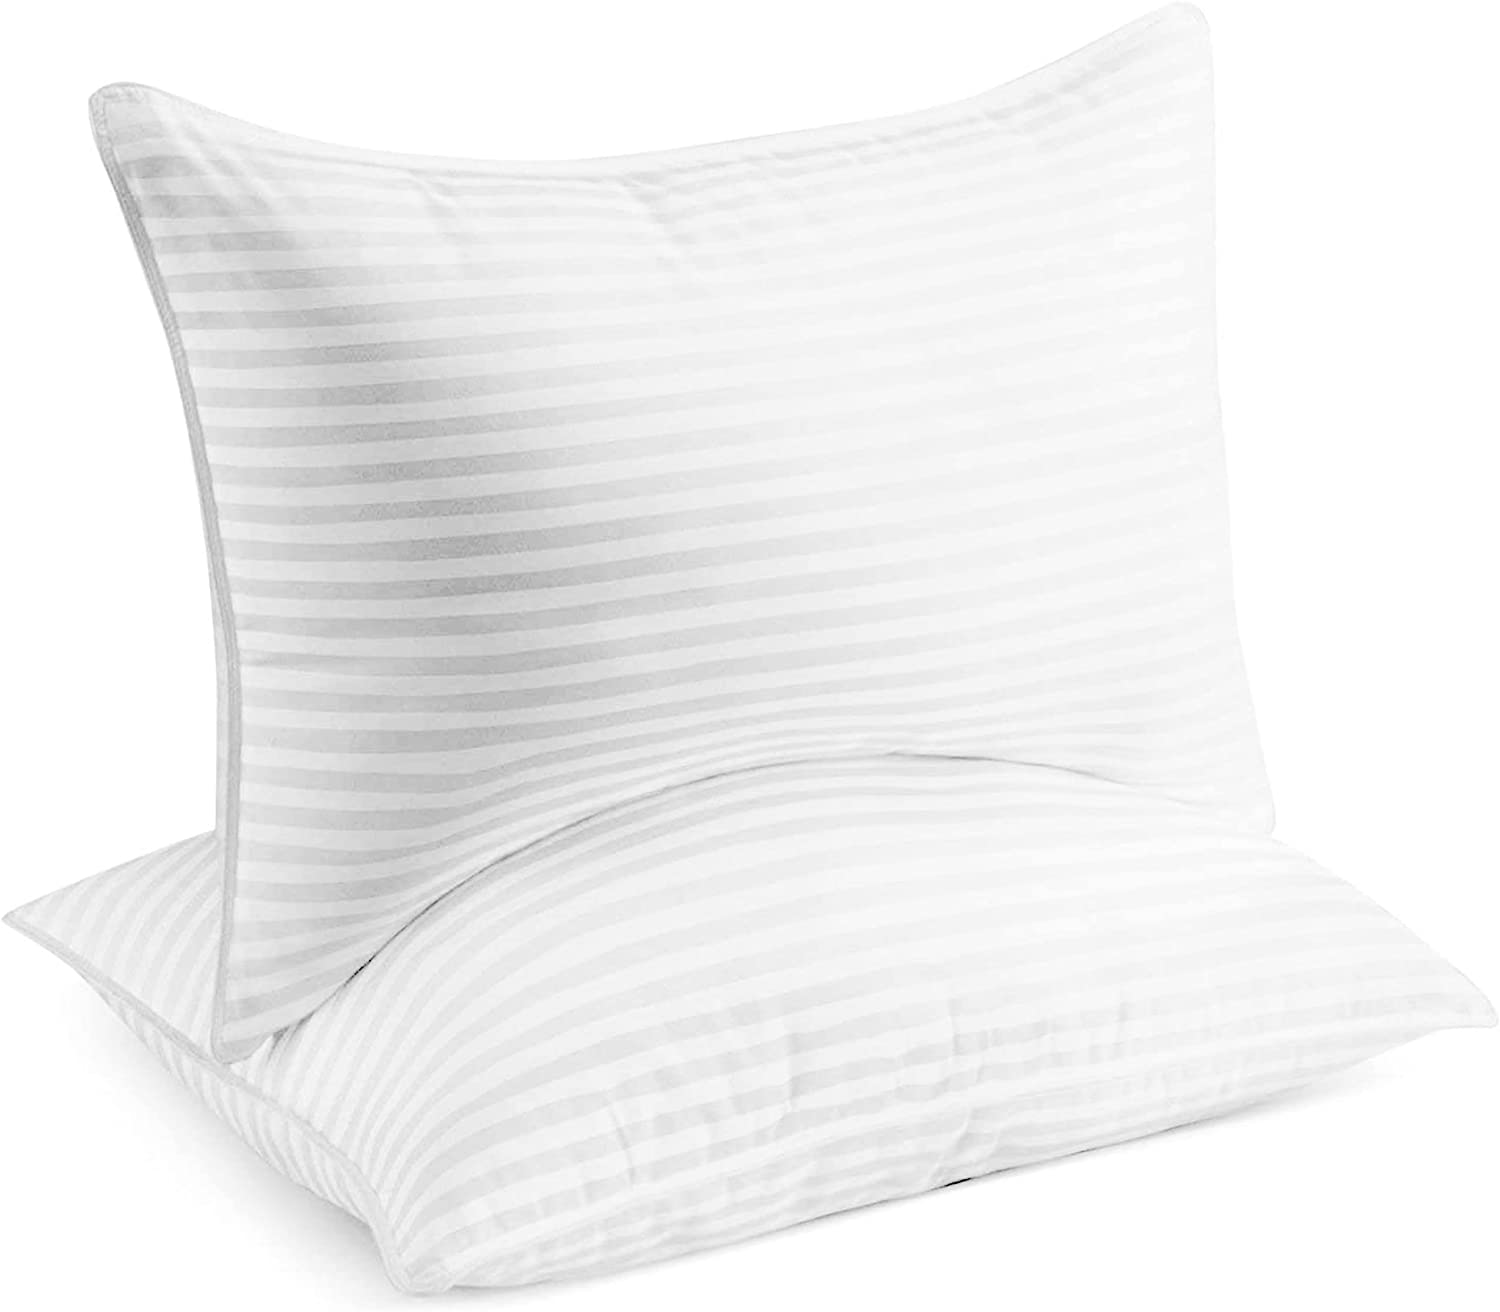 The Importance of Good Pillows for a Comfortable Night's Sleep